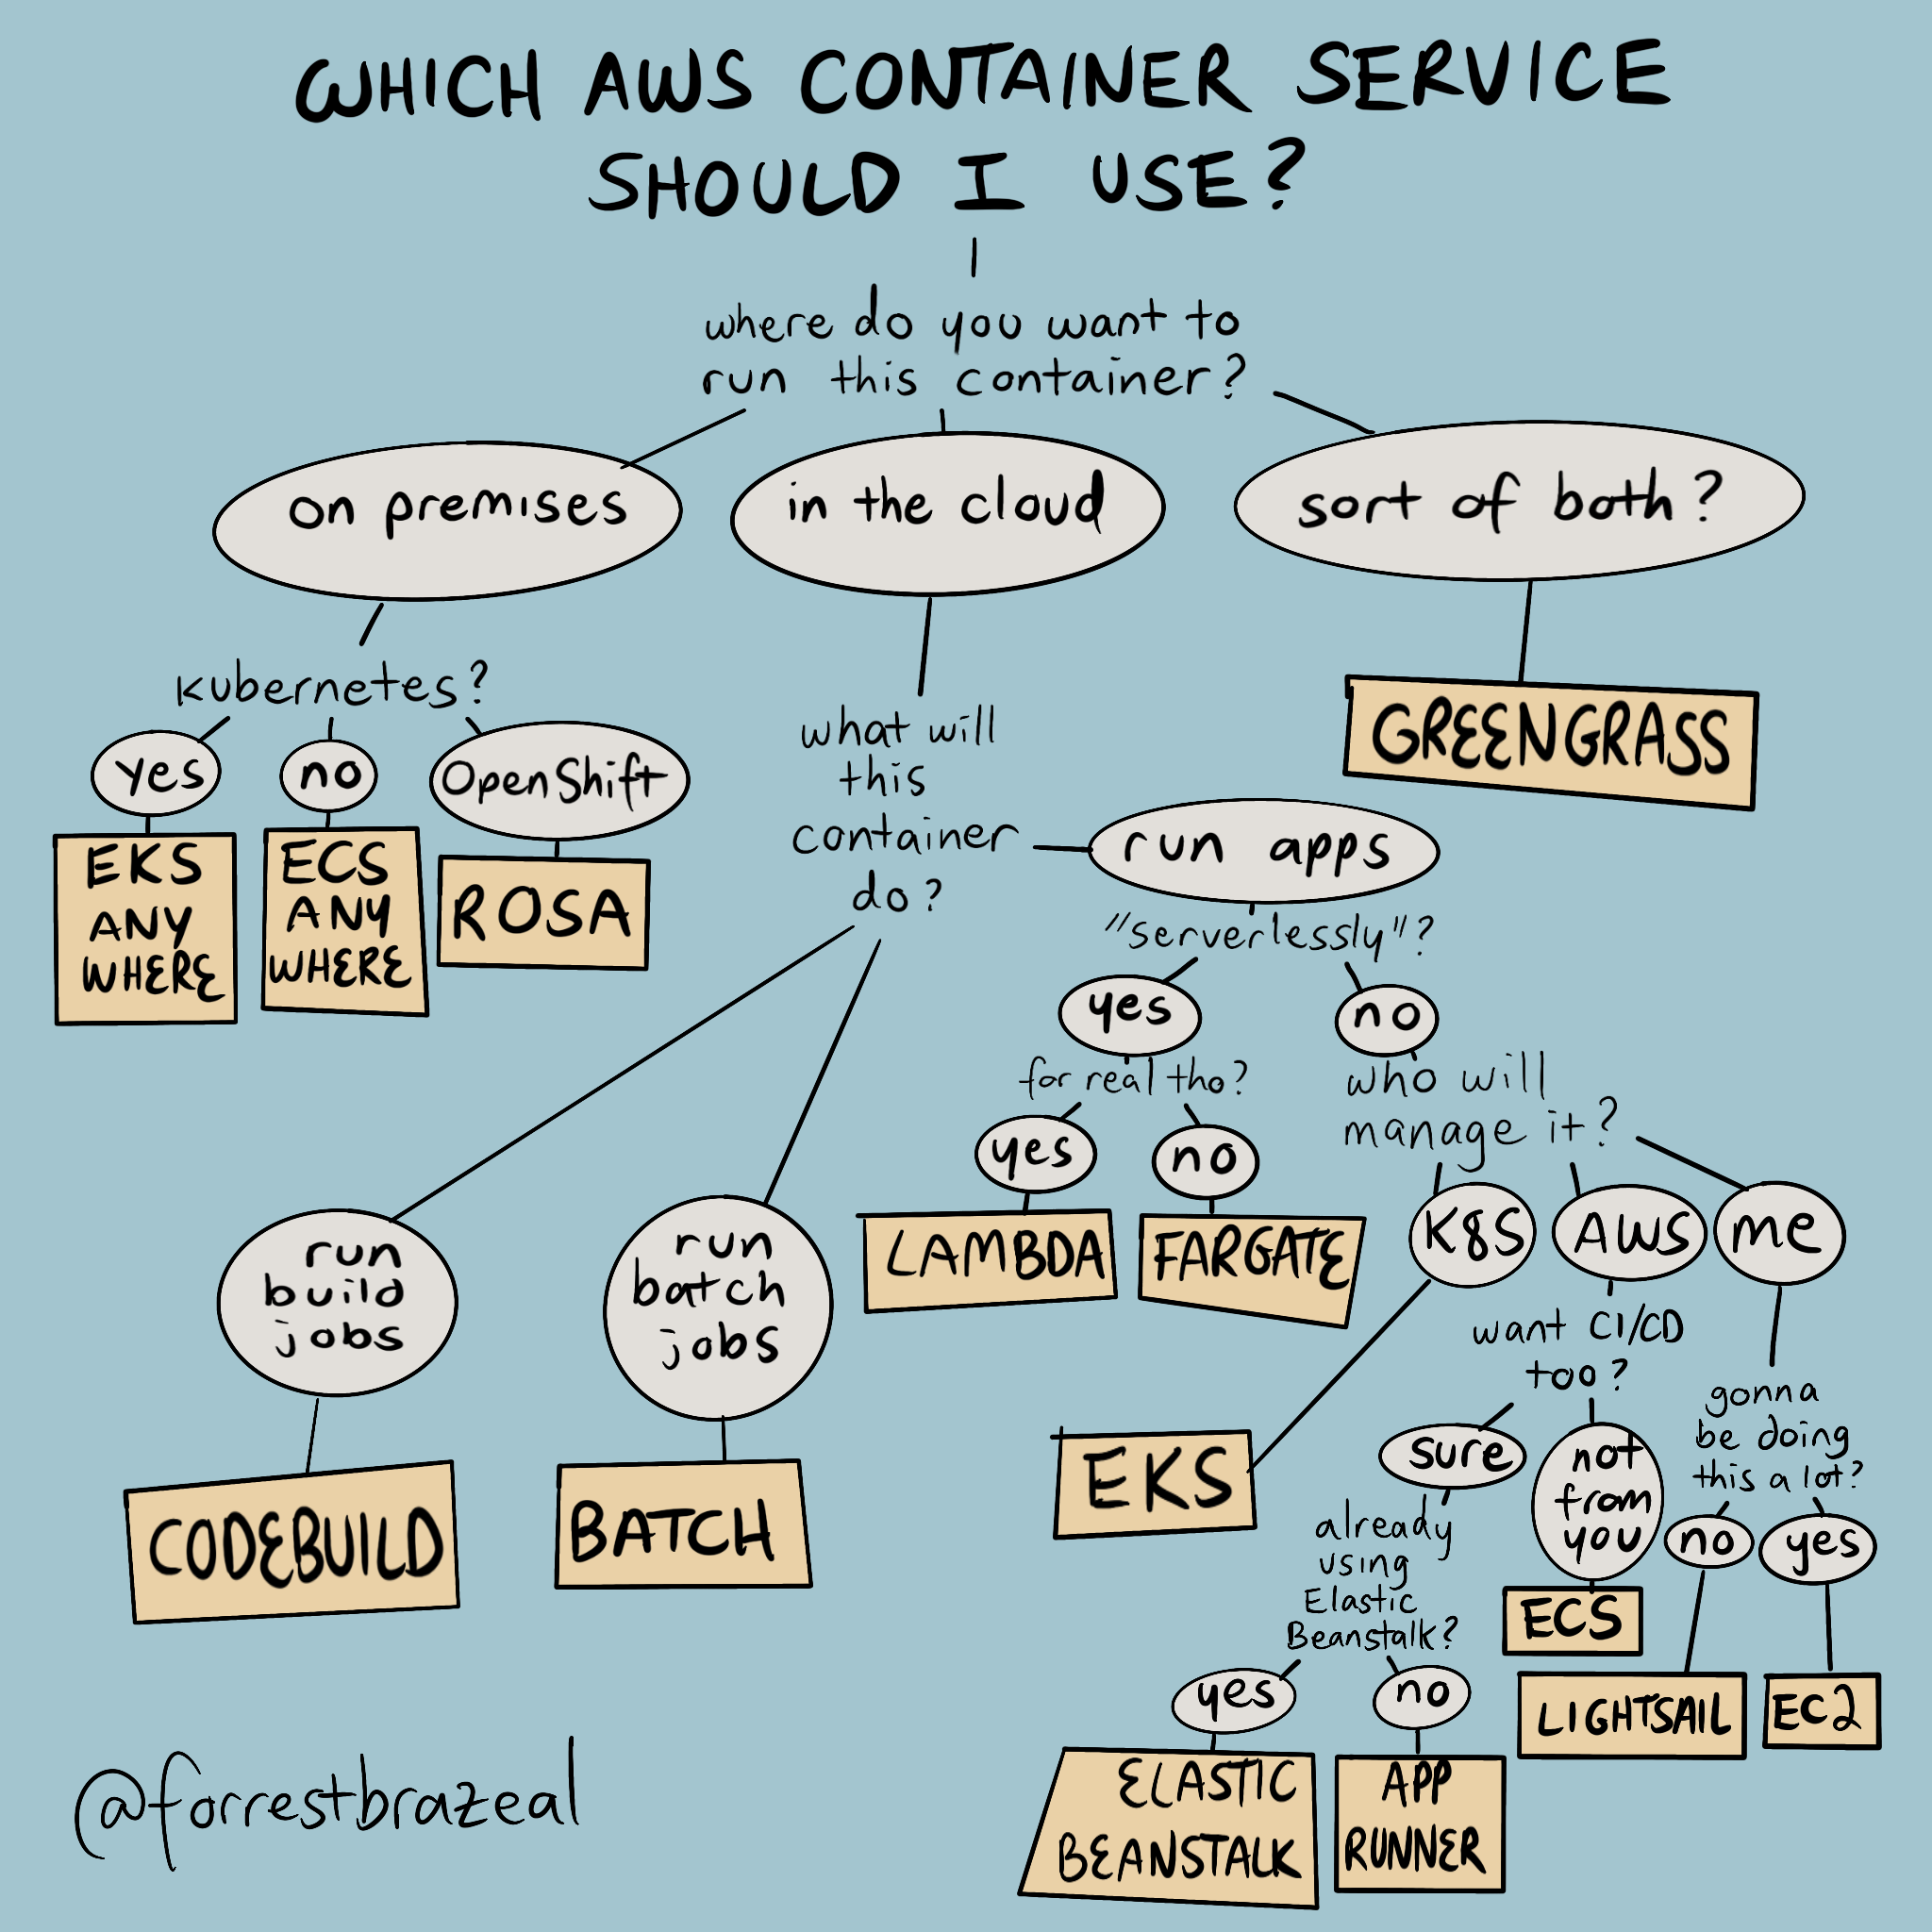 A funny flowchart about which AWS container service to choose.